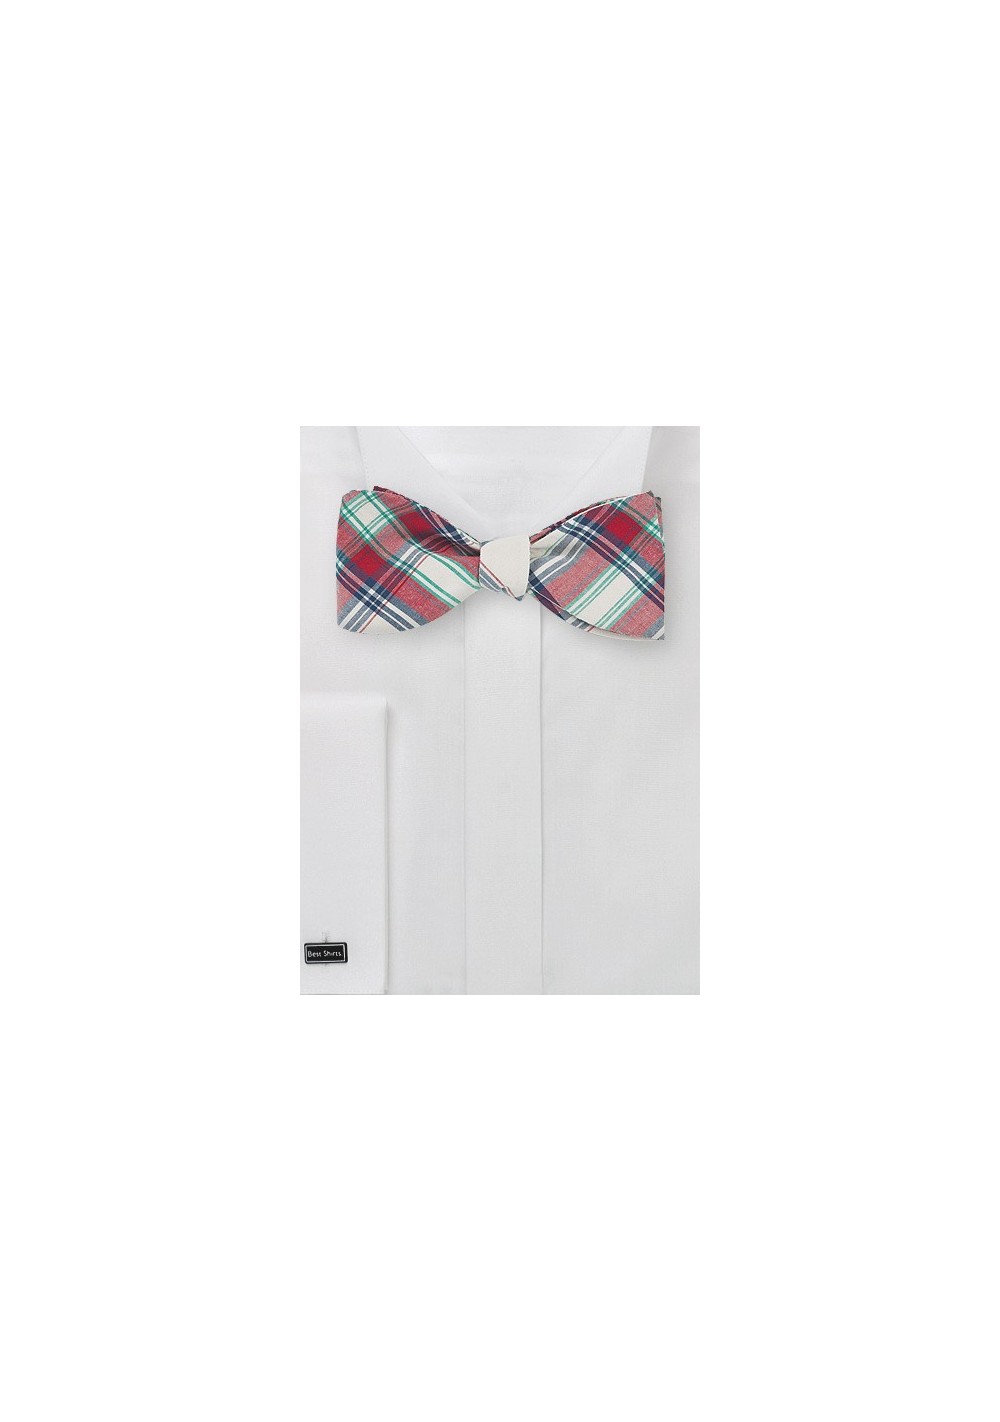 Summer Cotton Bow Tie in Red and Off White